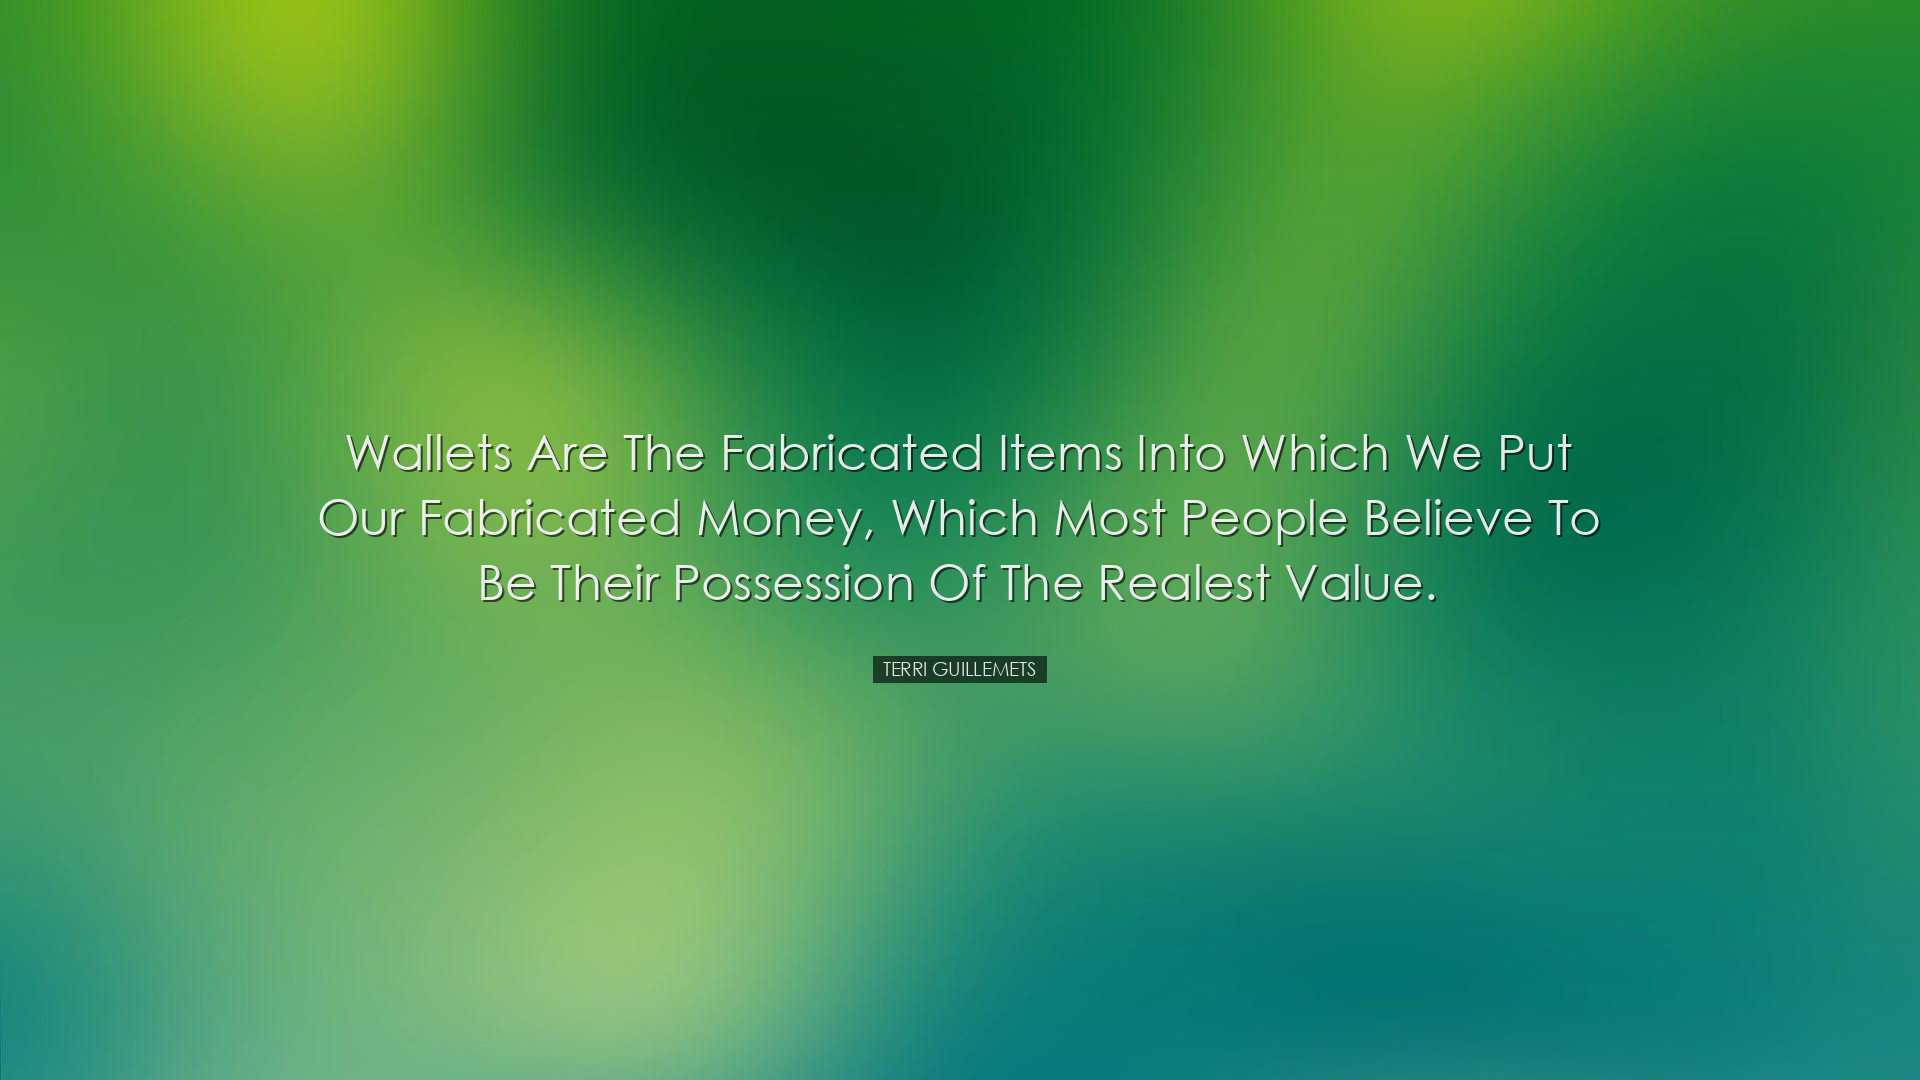 Wallets are the fabricated items into which we put our fabricated